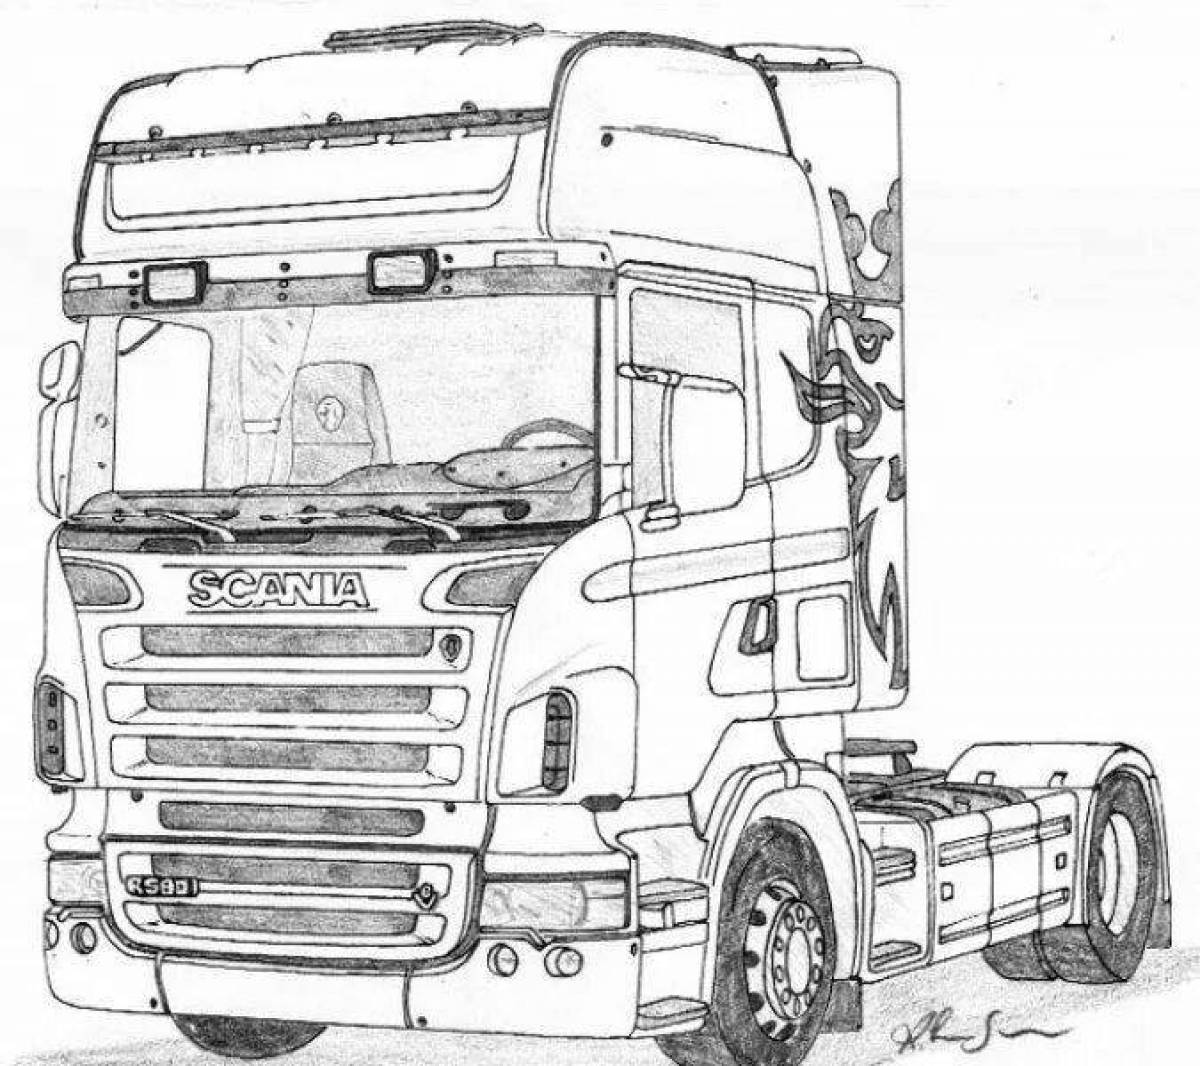 Scania's wonderful coloring book